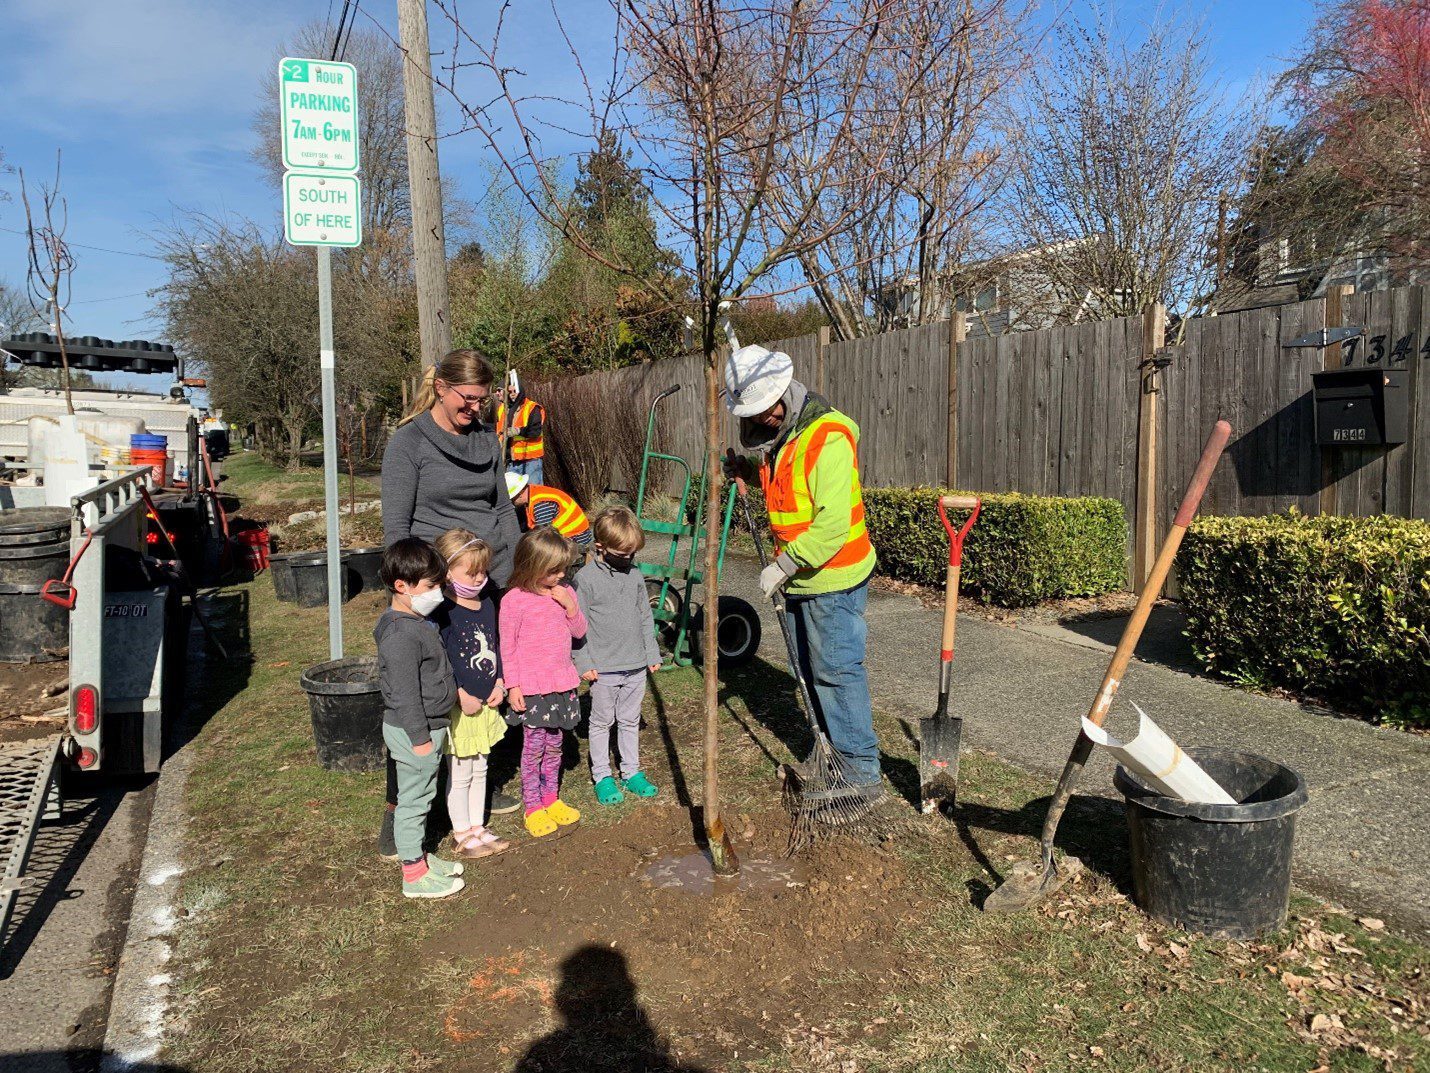 An SDOT crew member in a yellow vest and safety helmet shows a group of four school children how to care for a young tree on a median by the sidewalk using a rake.